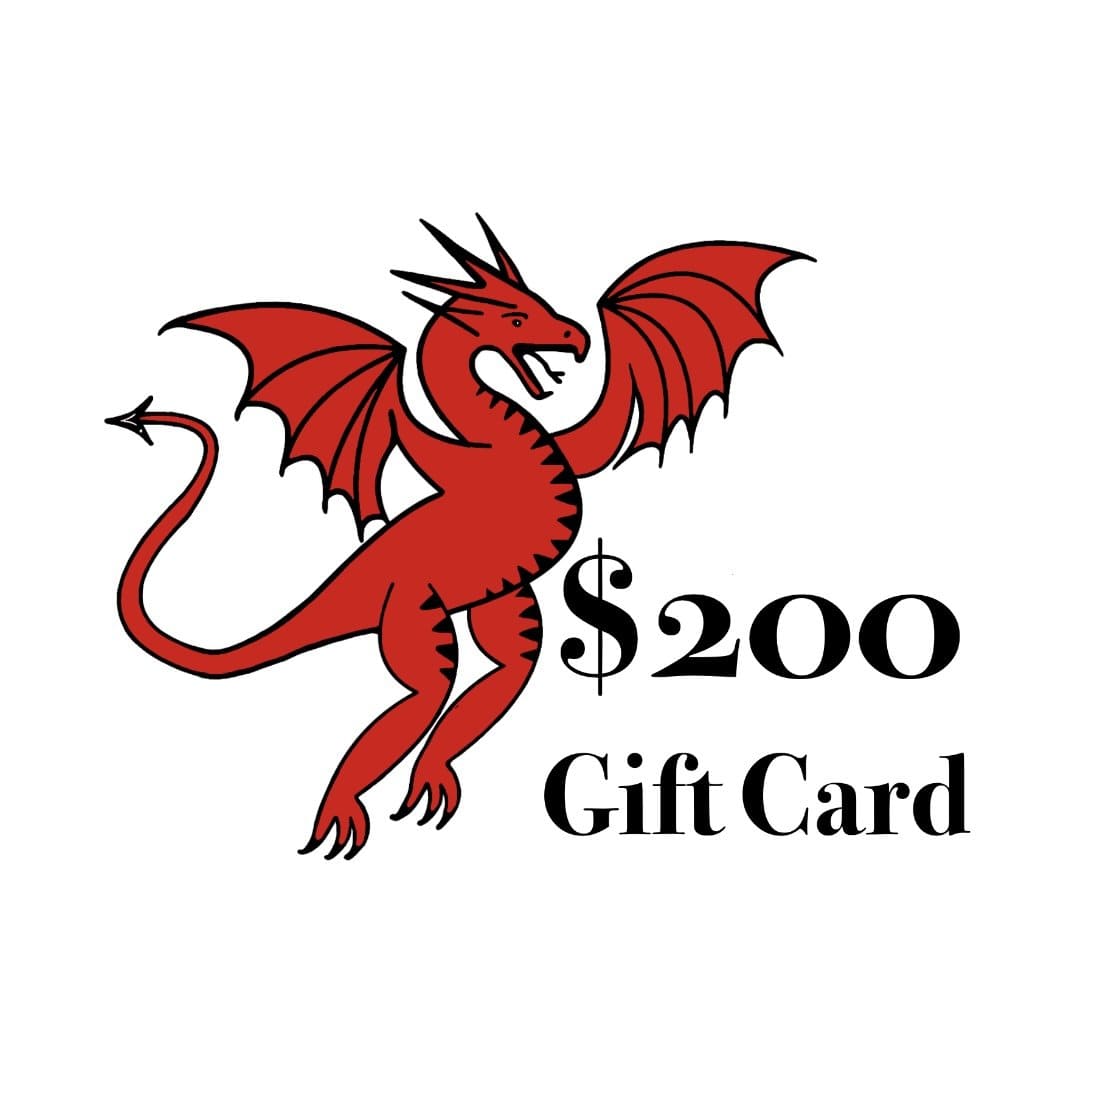 Reptile Realm Gift Cards $200.00 Reptile Realm Gift Card